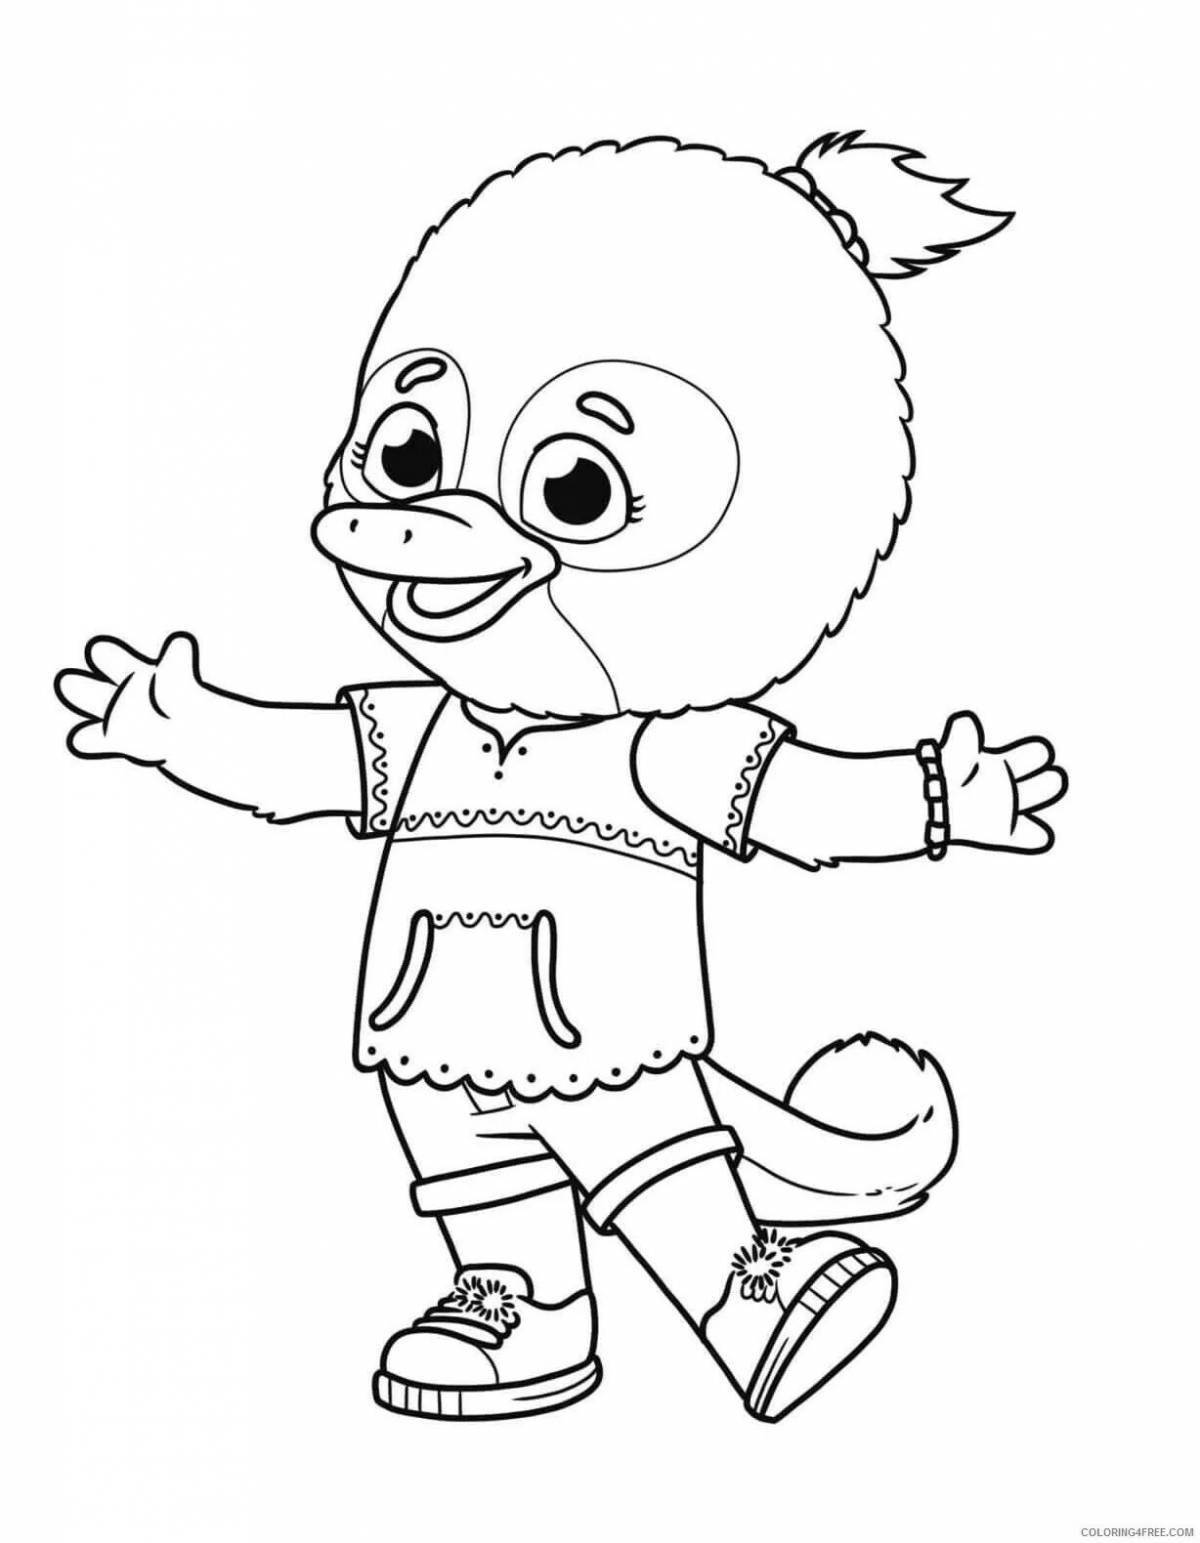 Color-party wednesday coloring page для детей